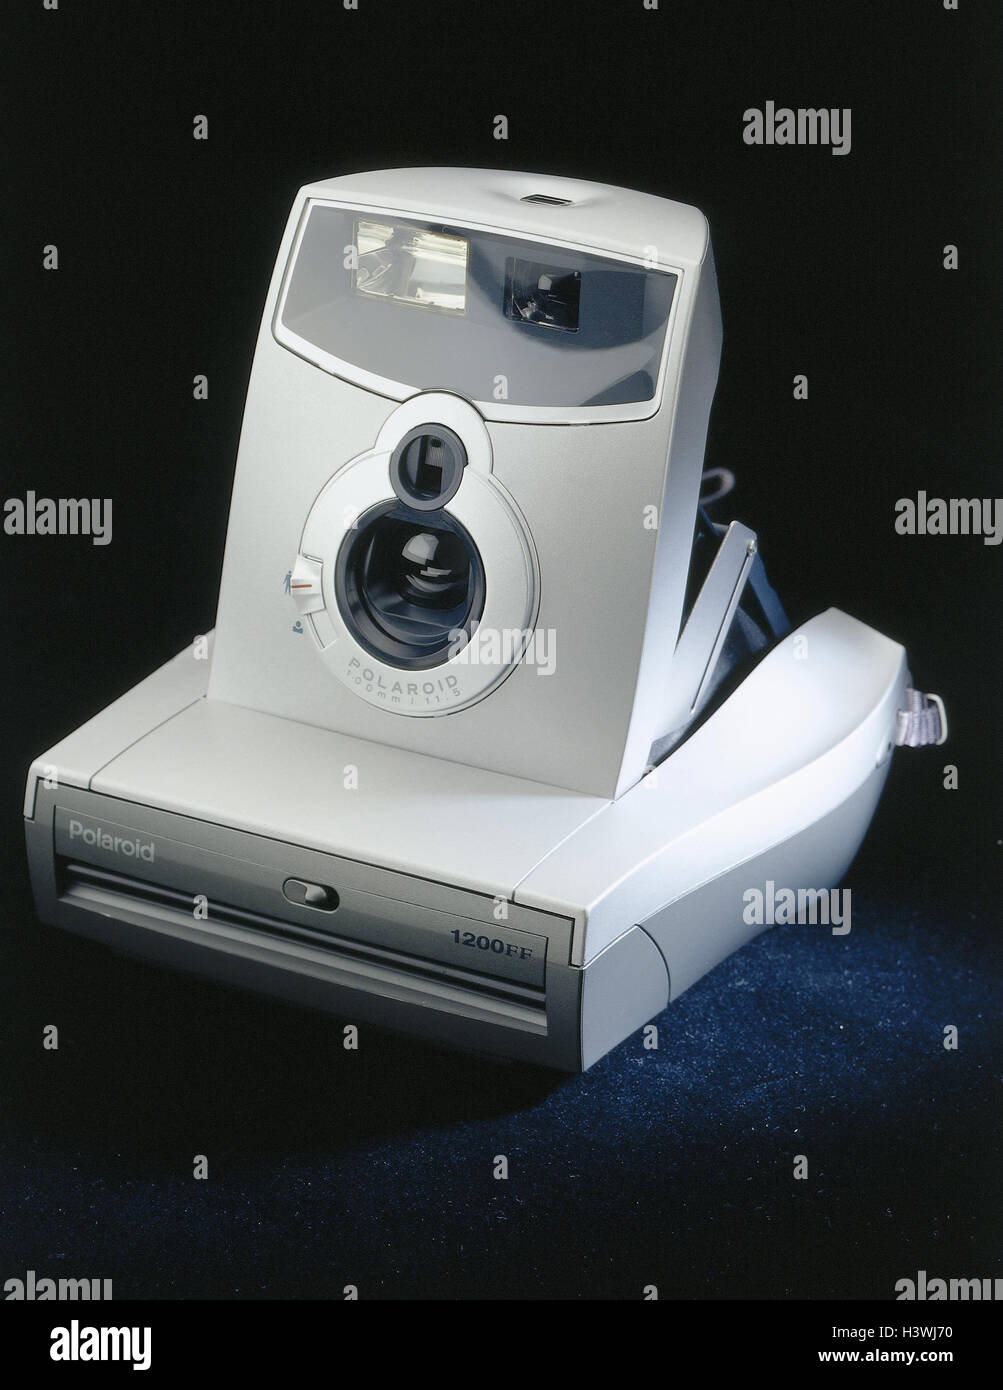 Polaroid in 1200 AND THE FOLLOWING image immediate picture camera, Still life, product photography, camera, immediate picture, Polaroid camera, photo camera, camera, photo, opened, ready for operation, rangefinder camera Stock Photo